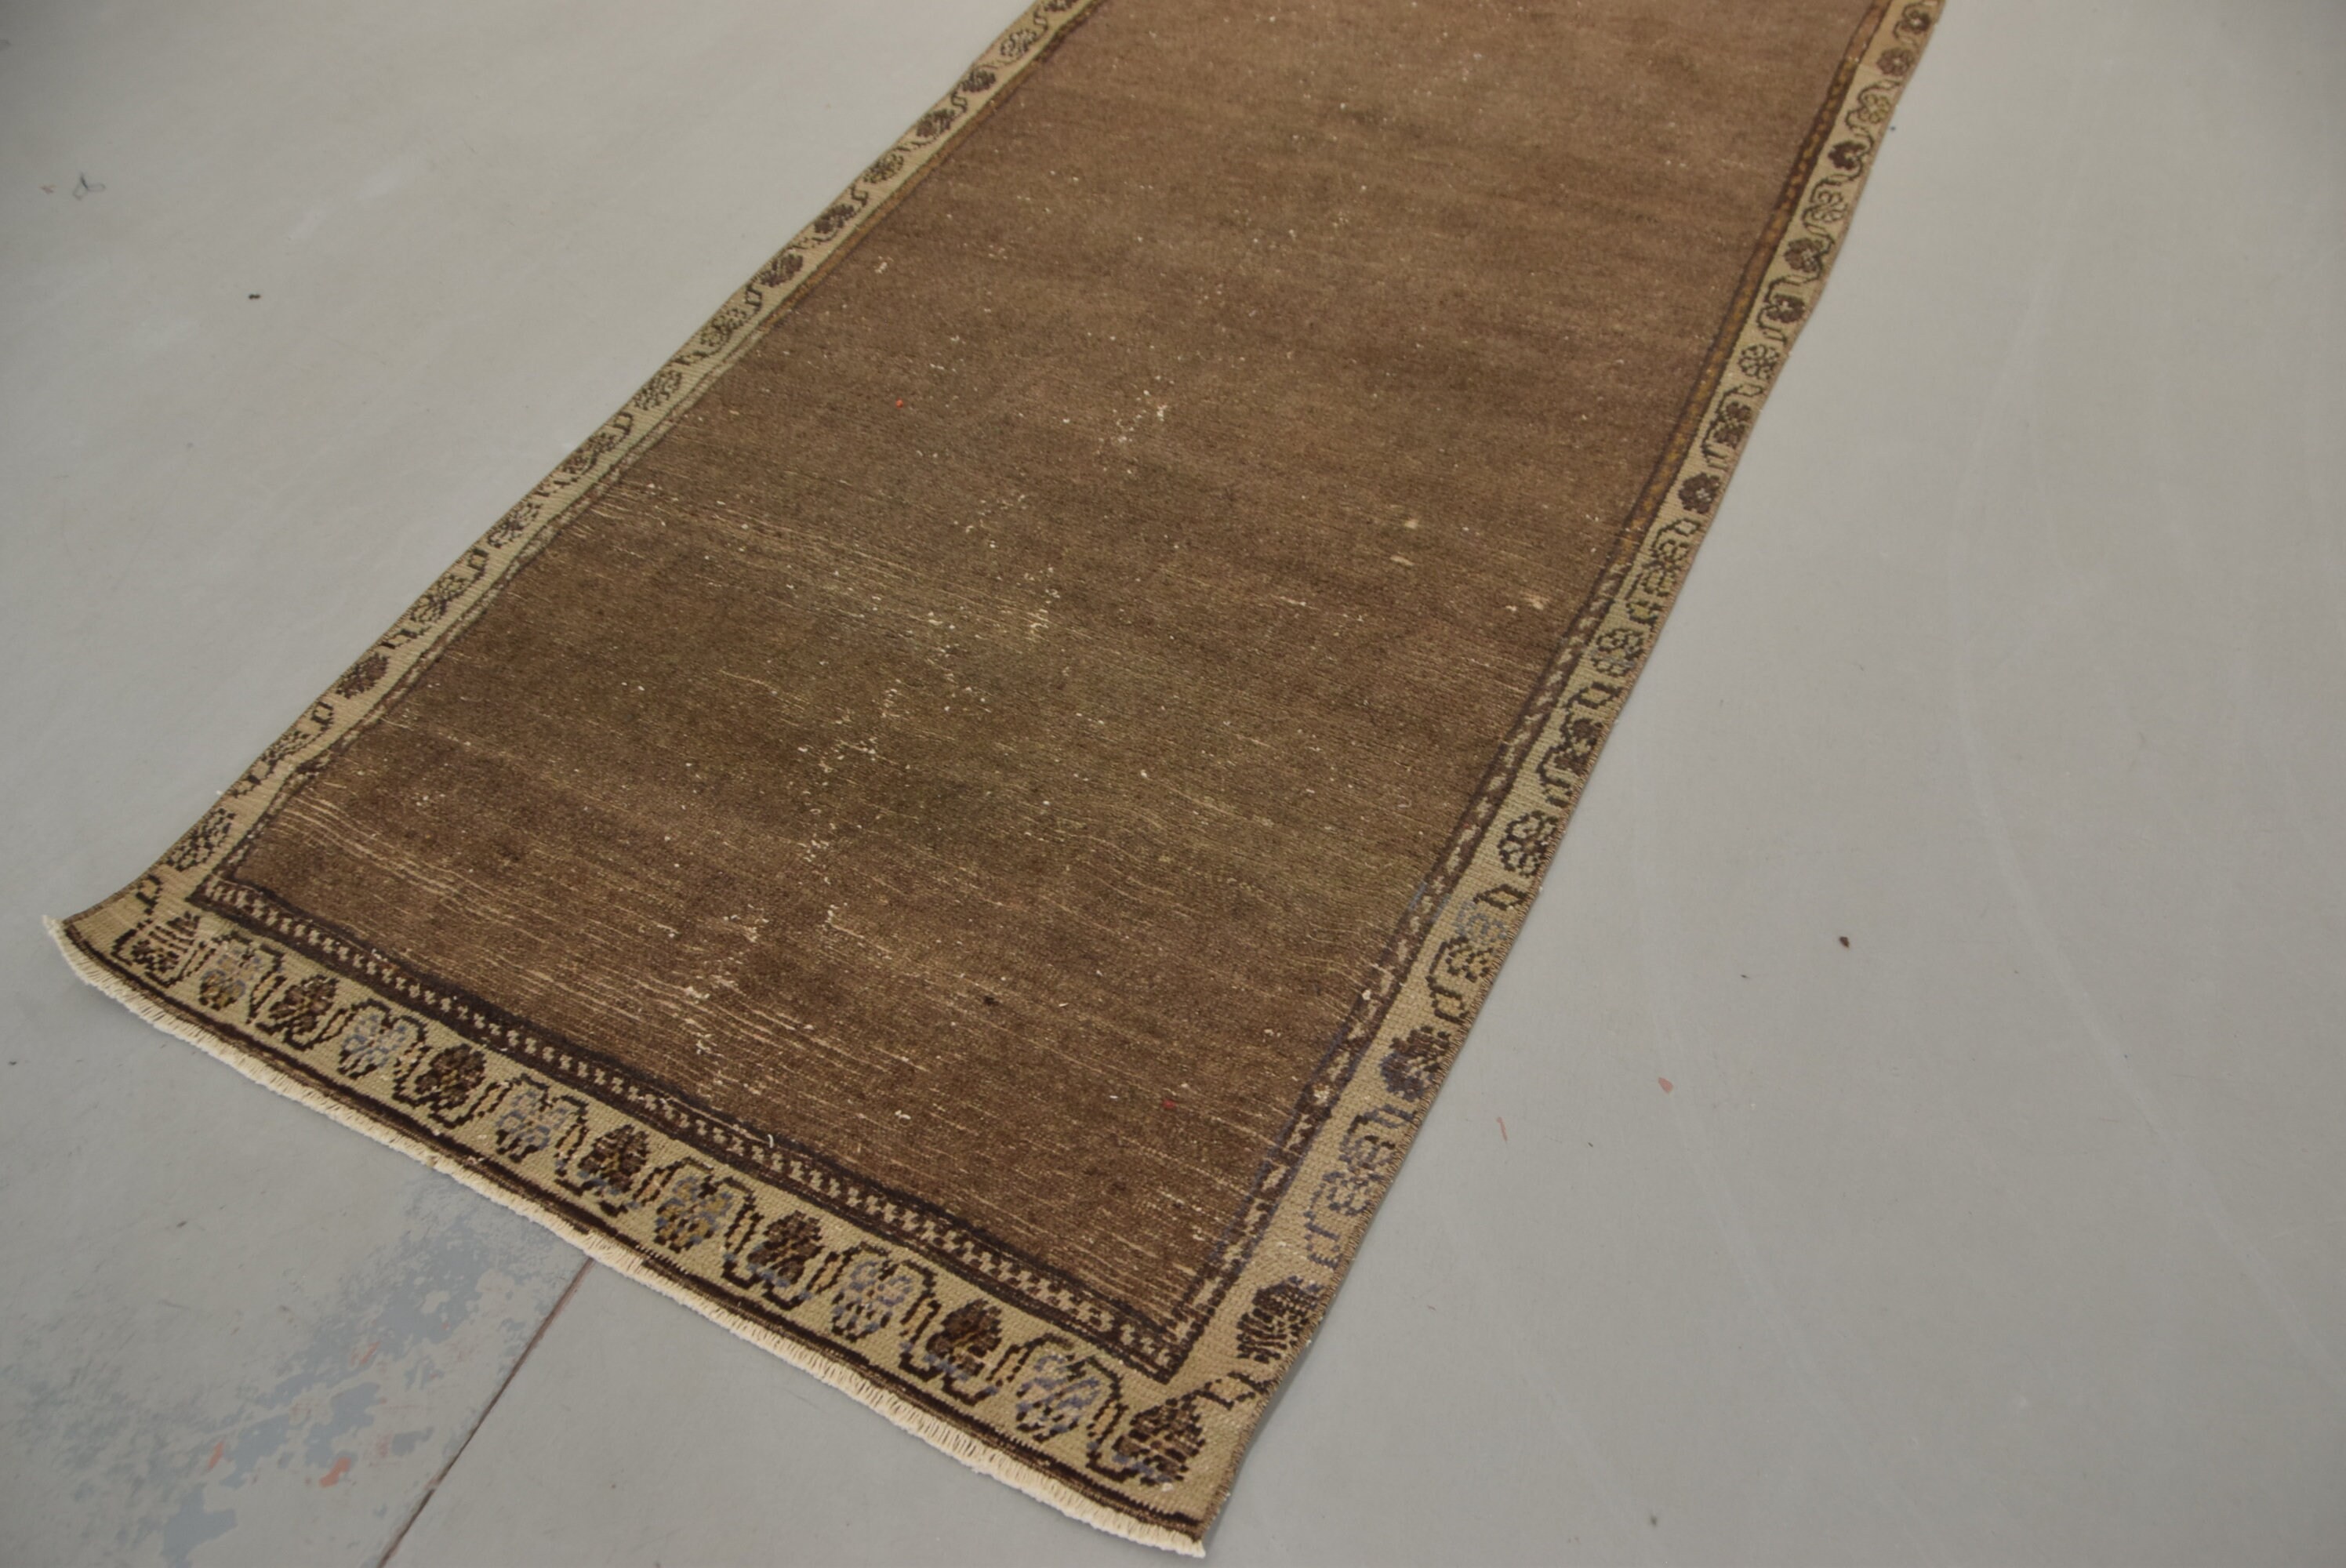 Antique Rugs, Gray Home Decor Rugs, Oriental Rugs, Turkish Rugs, 3.6x9.7 ft Runner Rug, Corridor Rugs, Vintage Rugs, Rugs for Kitchen